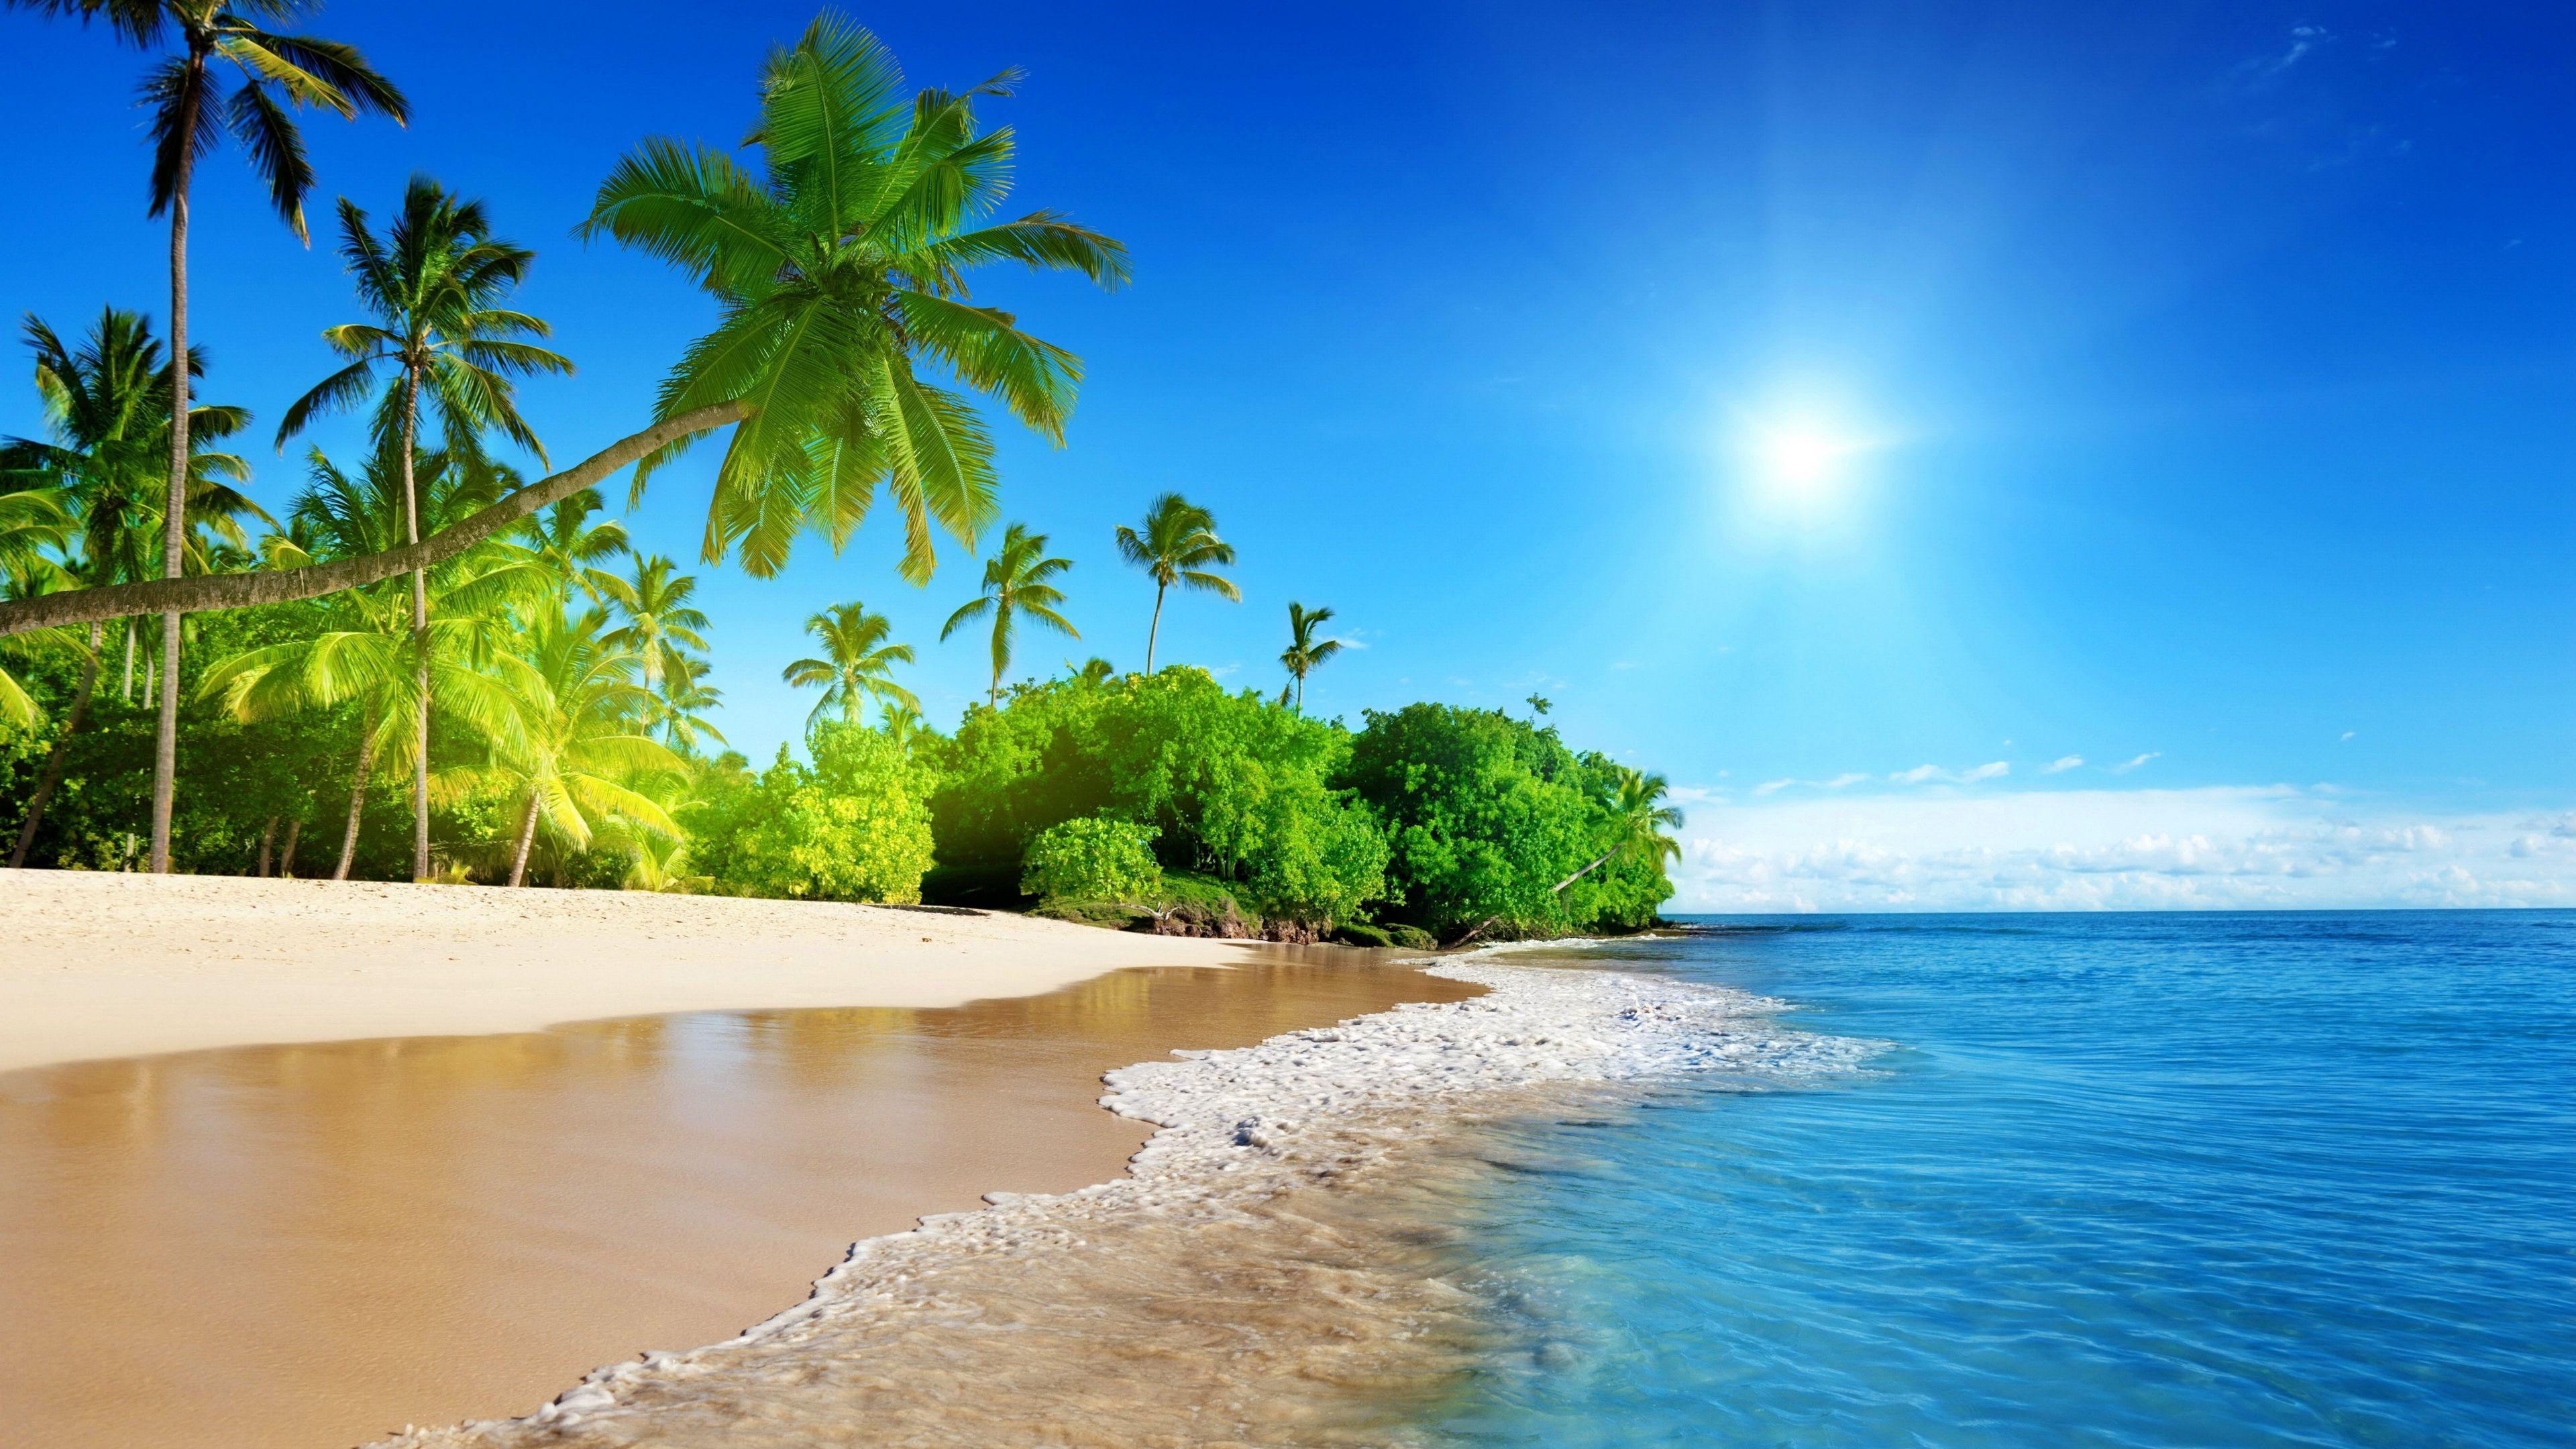 564562 1920x1080 summer pc backgrounds hd free JPG 472 kB - Rare Gallery HD  Wallpapers